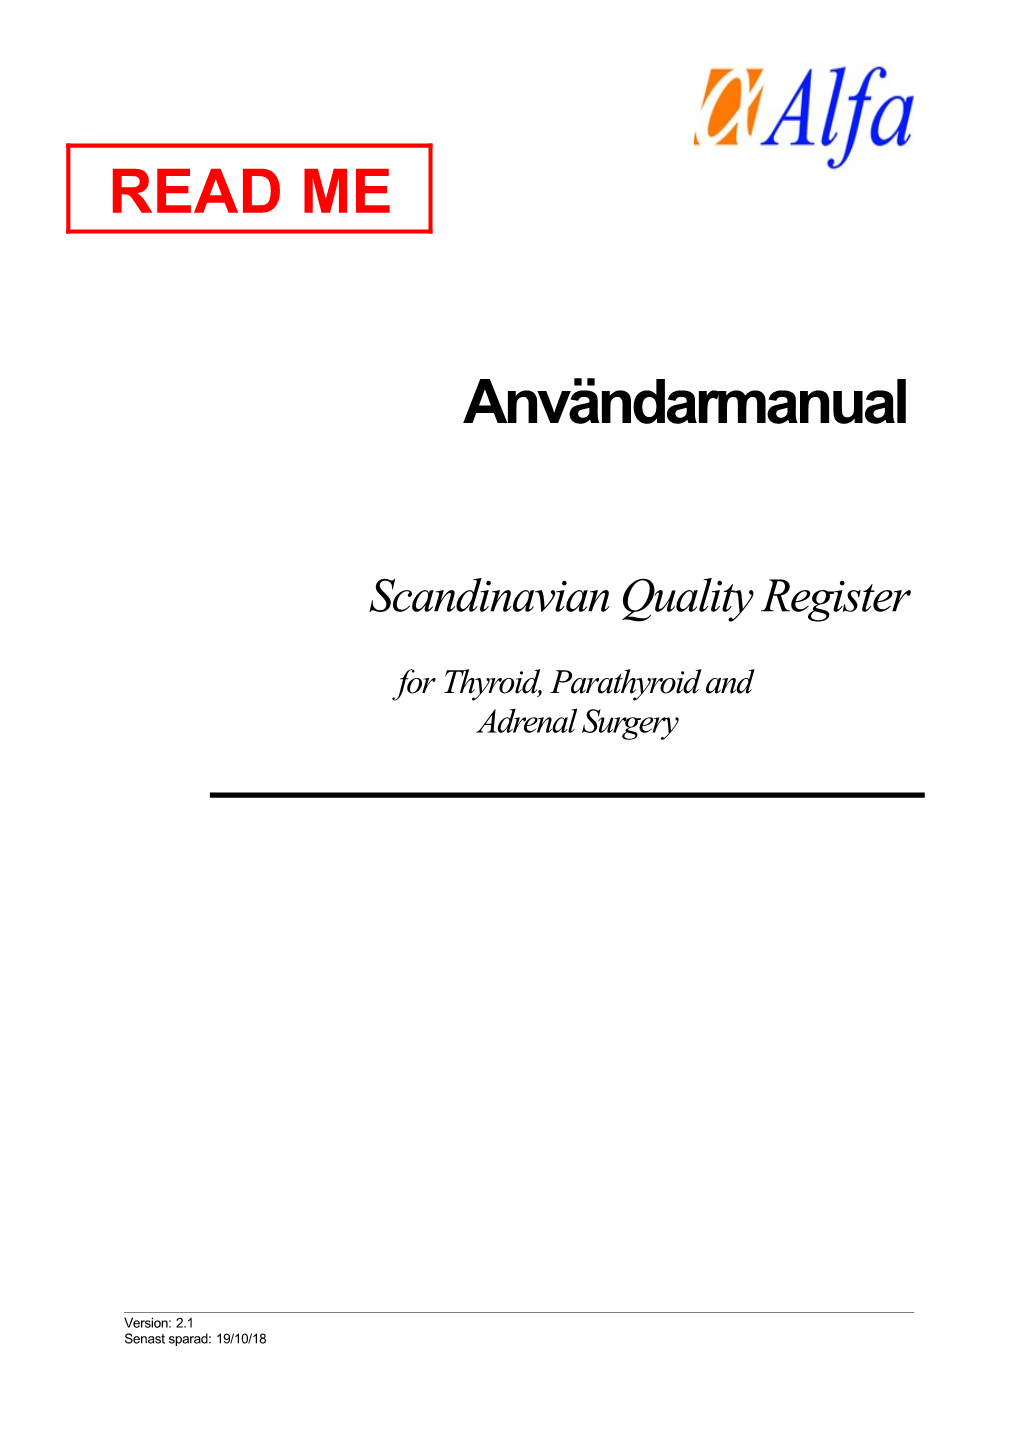 Scandinavian Quality Register for Thyroid, Parathyroid and Adrenal Surgery